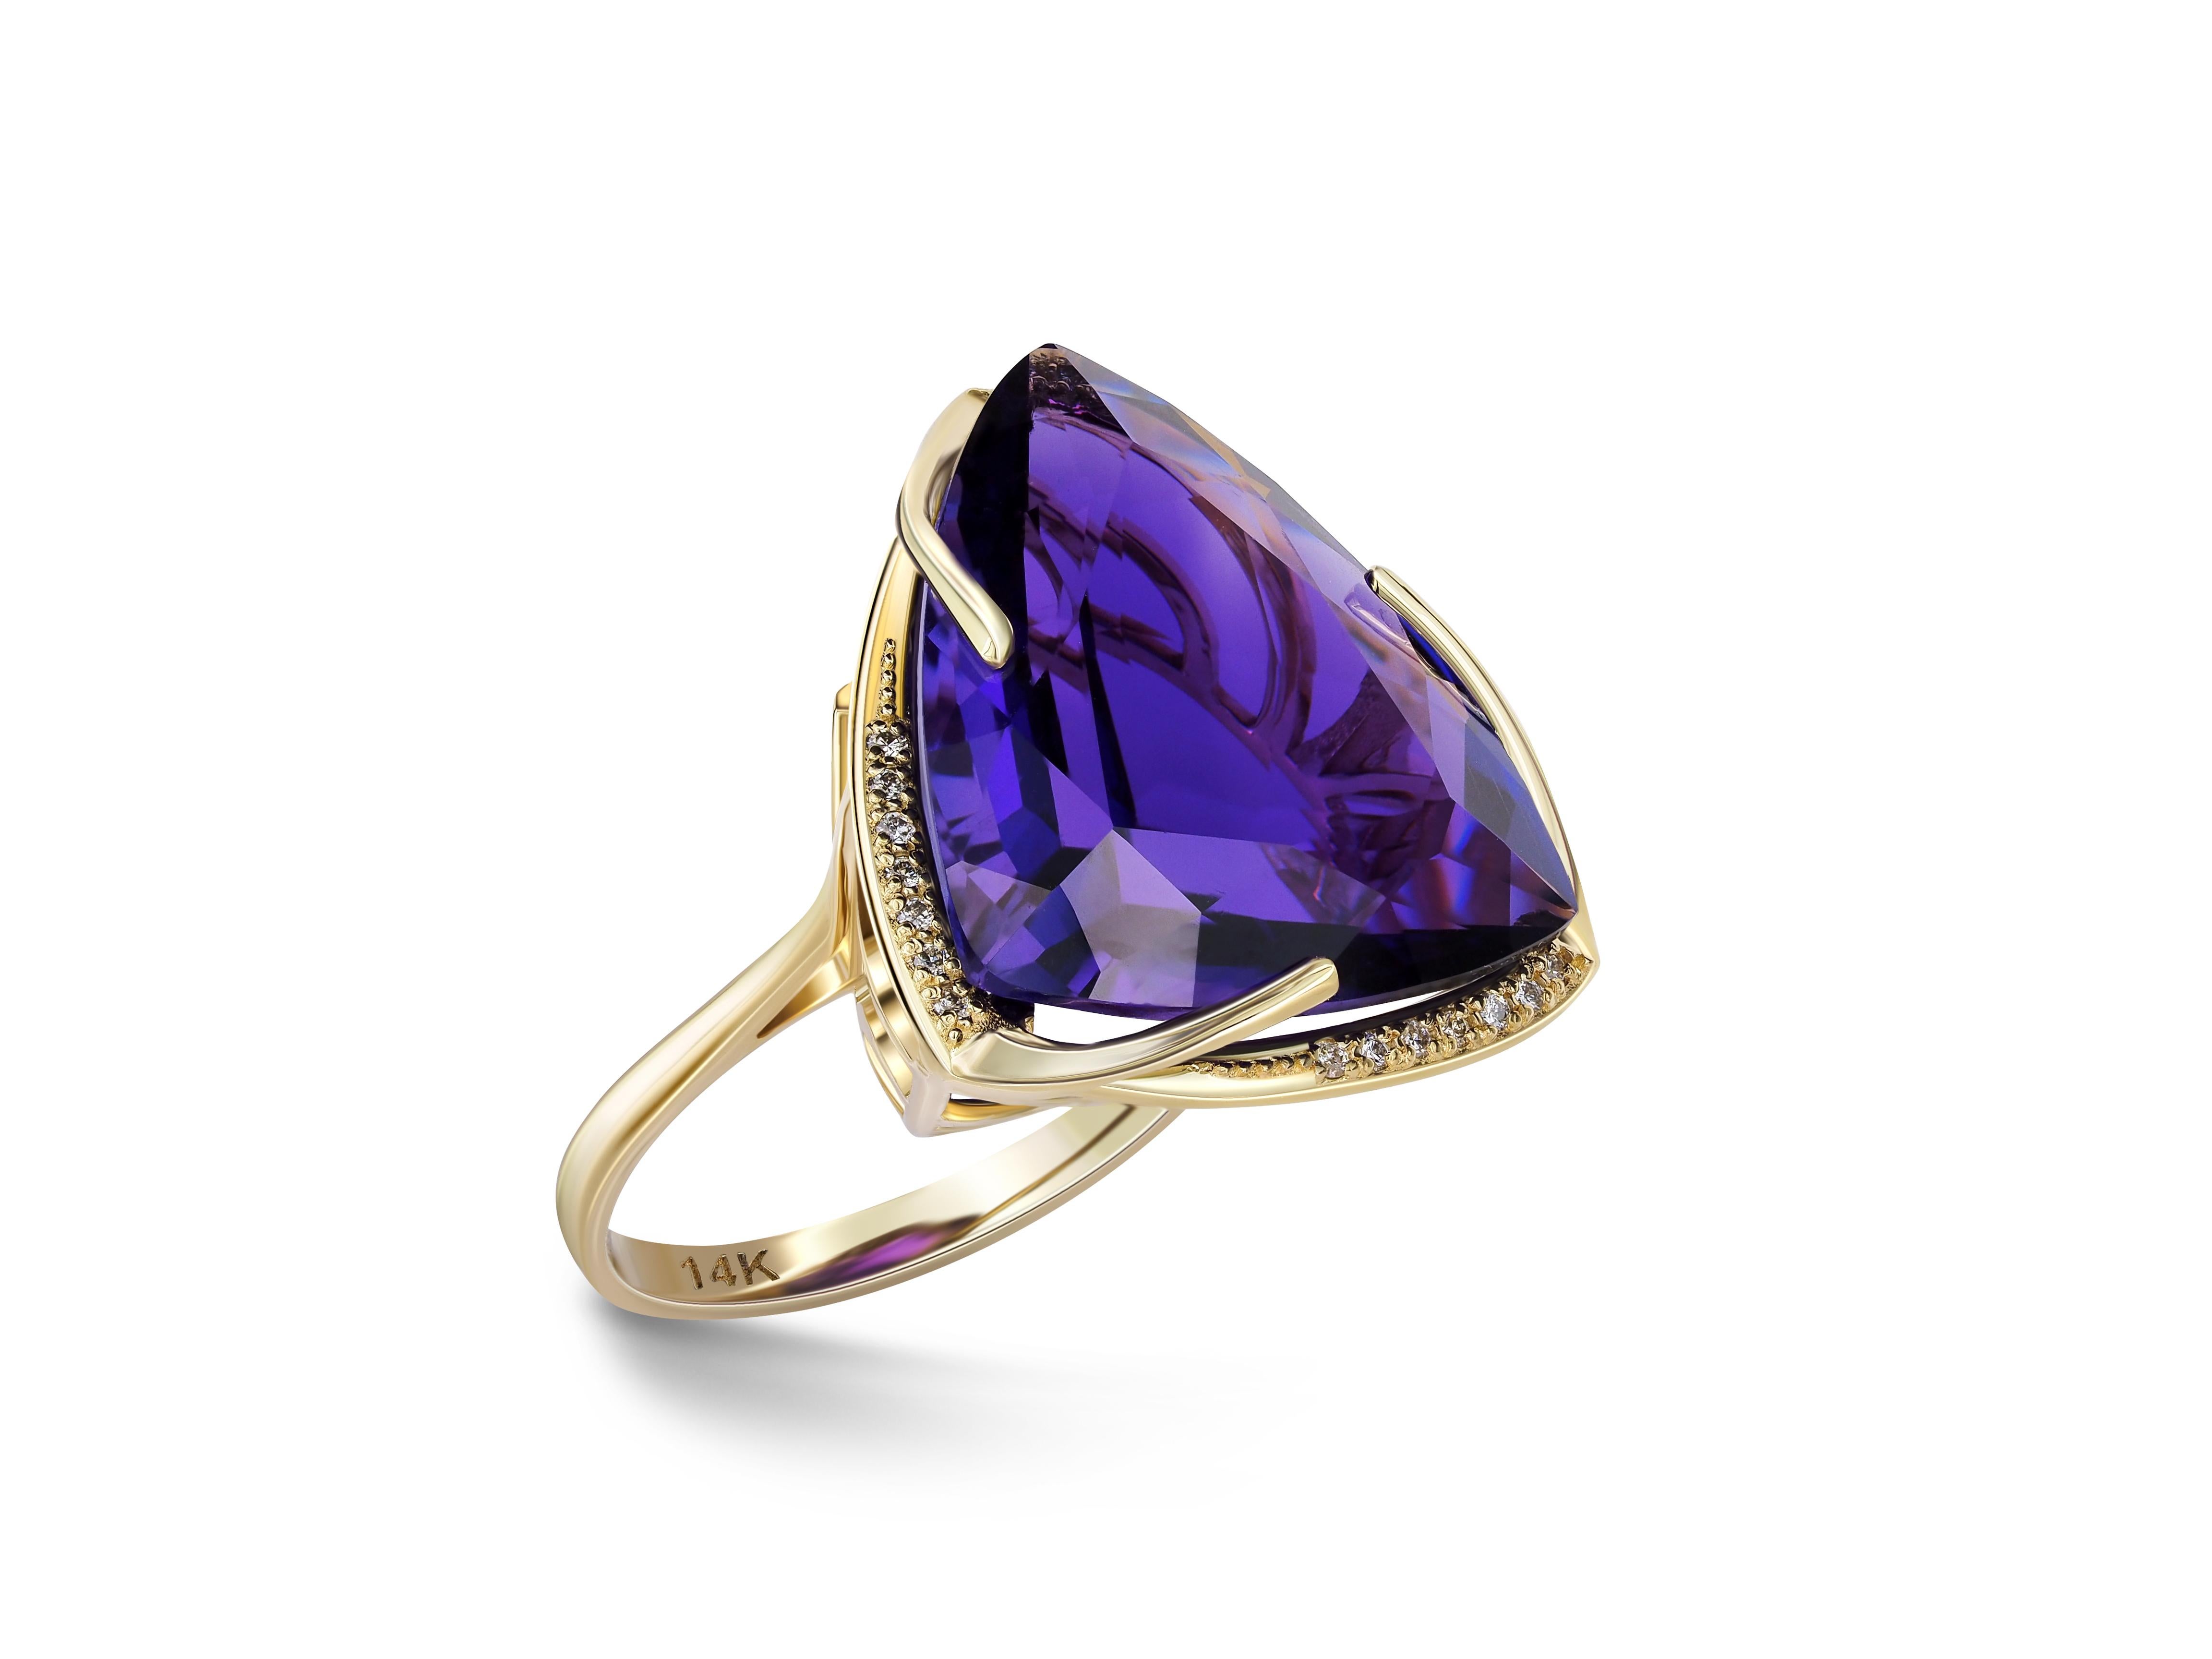 Modern 14 Karat Gold Ring with Amethyst and Diamonds, Amethyst Cocktail Ring